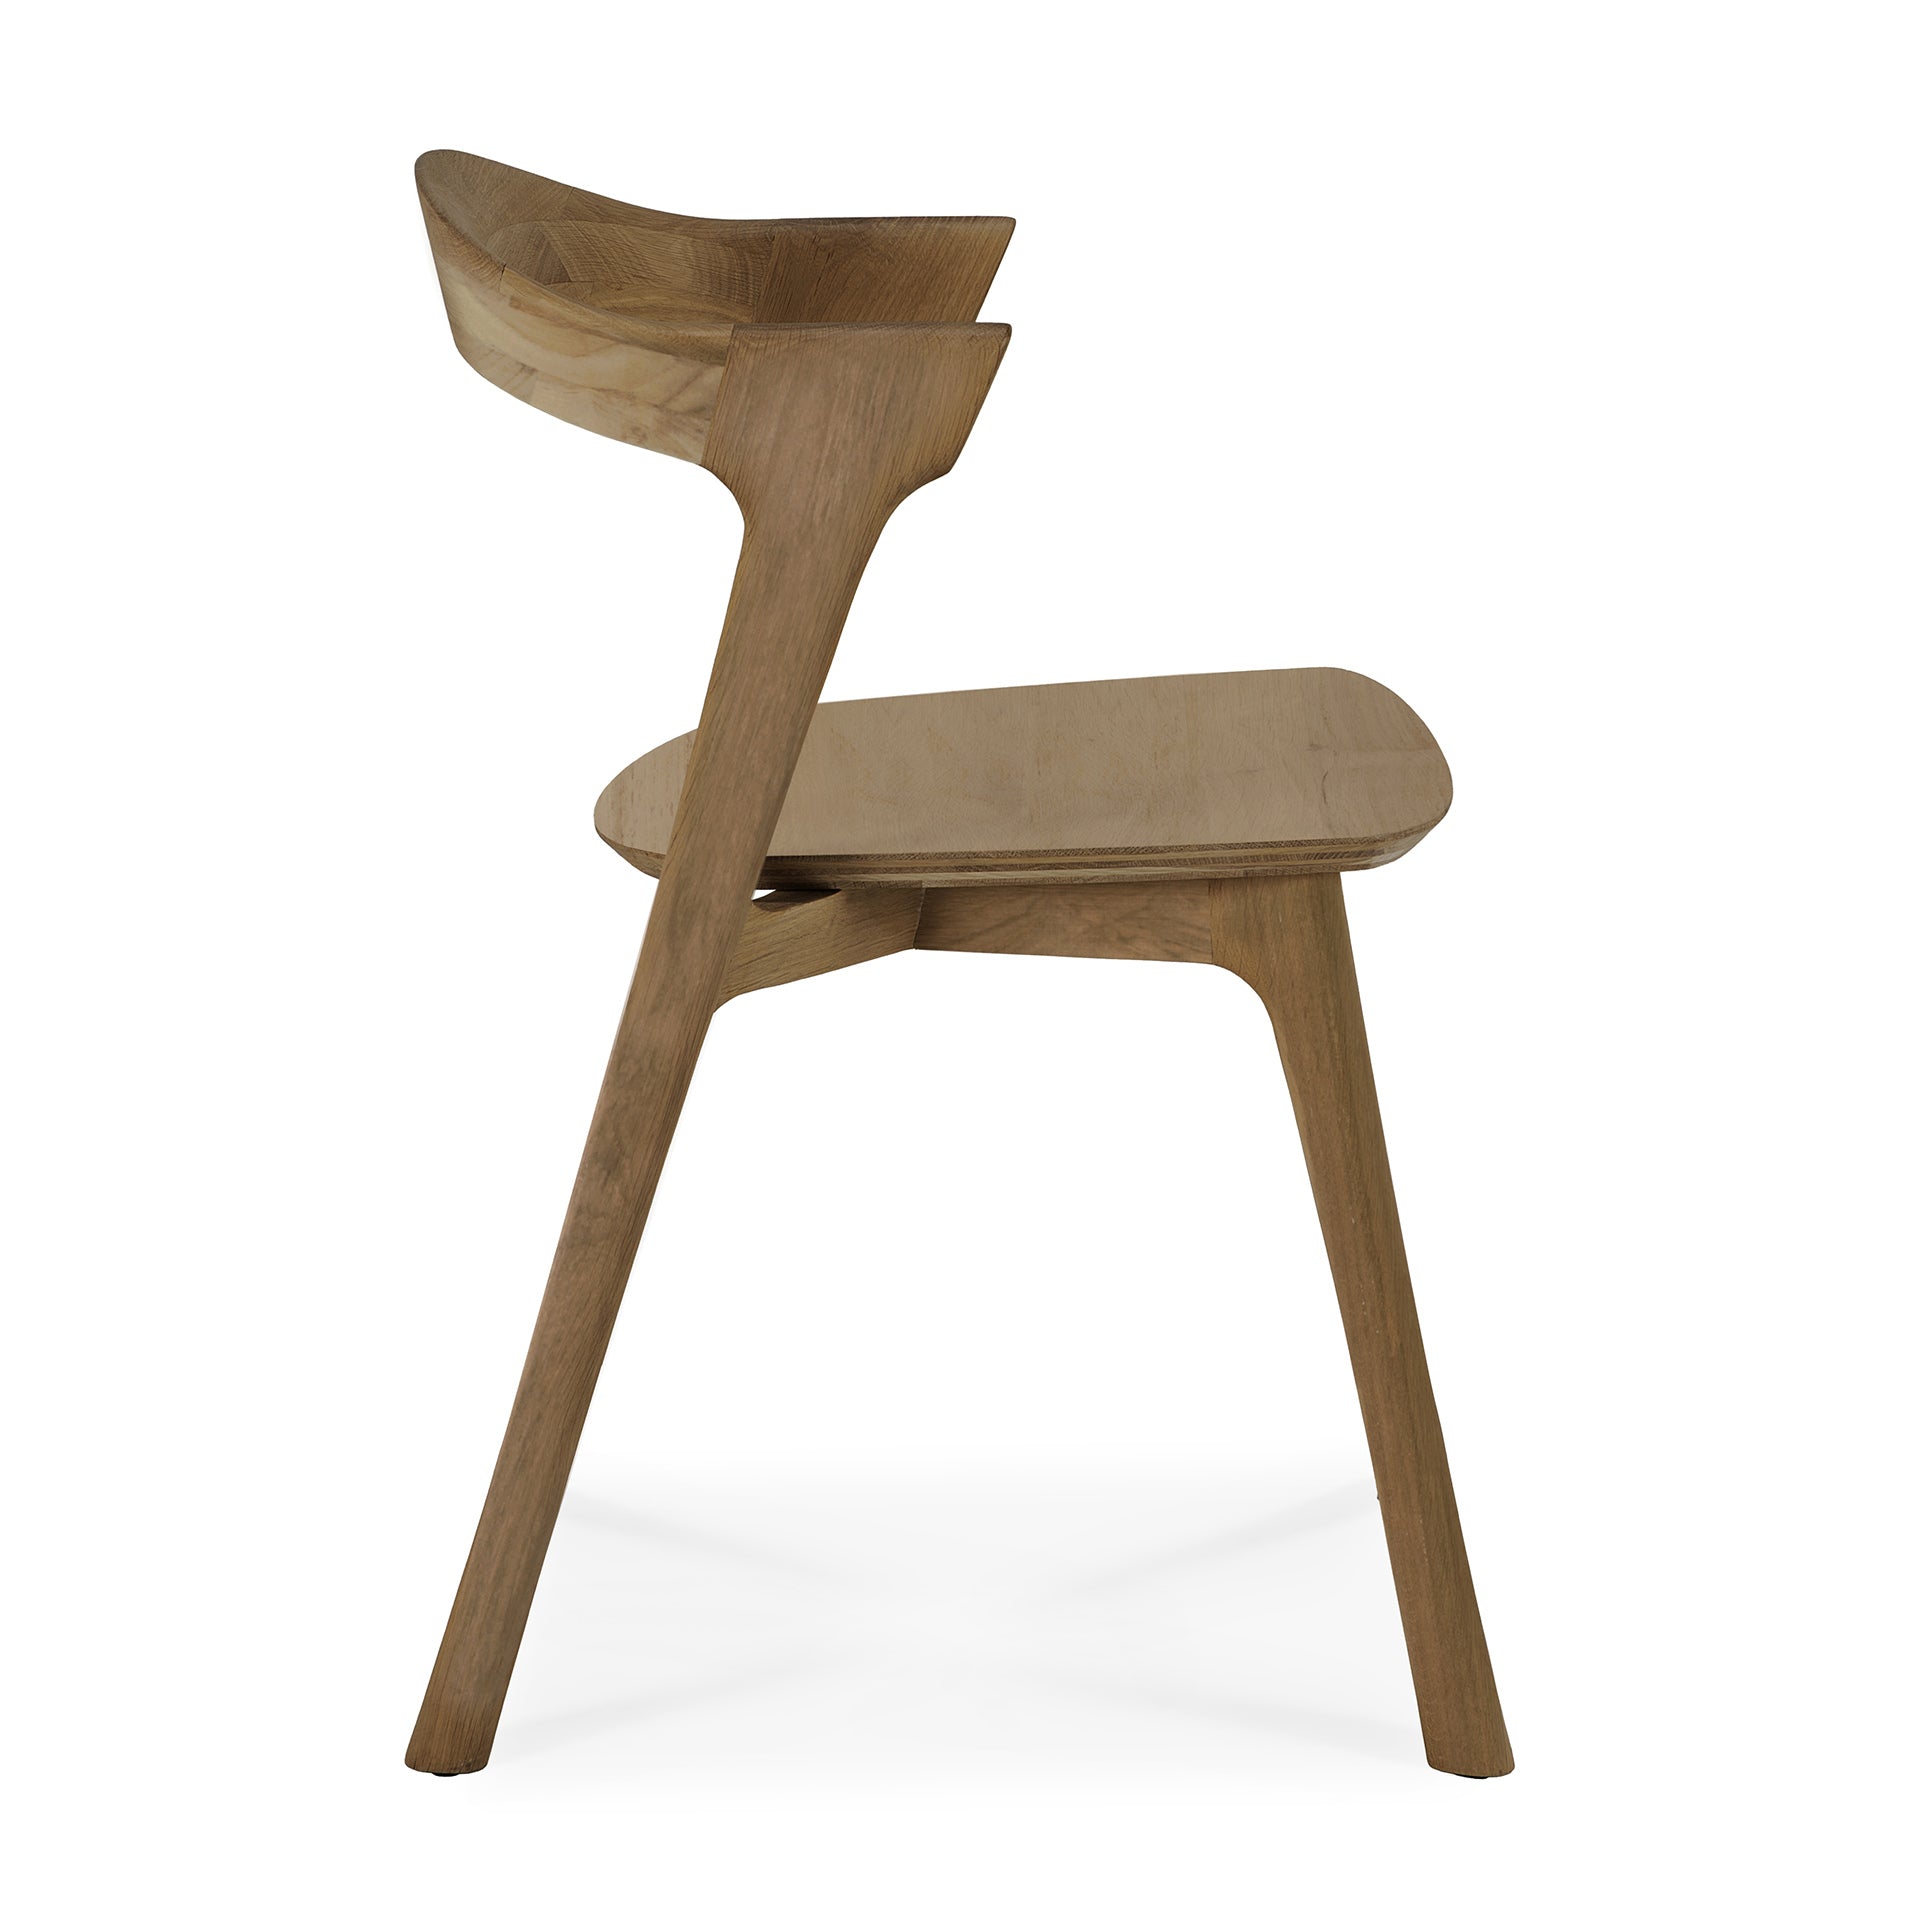 Ethnicraft Teak Bok Dining Chair is available from Make Your House A Home, Bendigo, Victoria, Australia